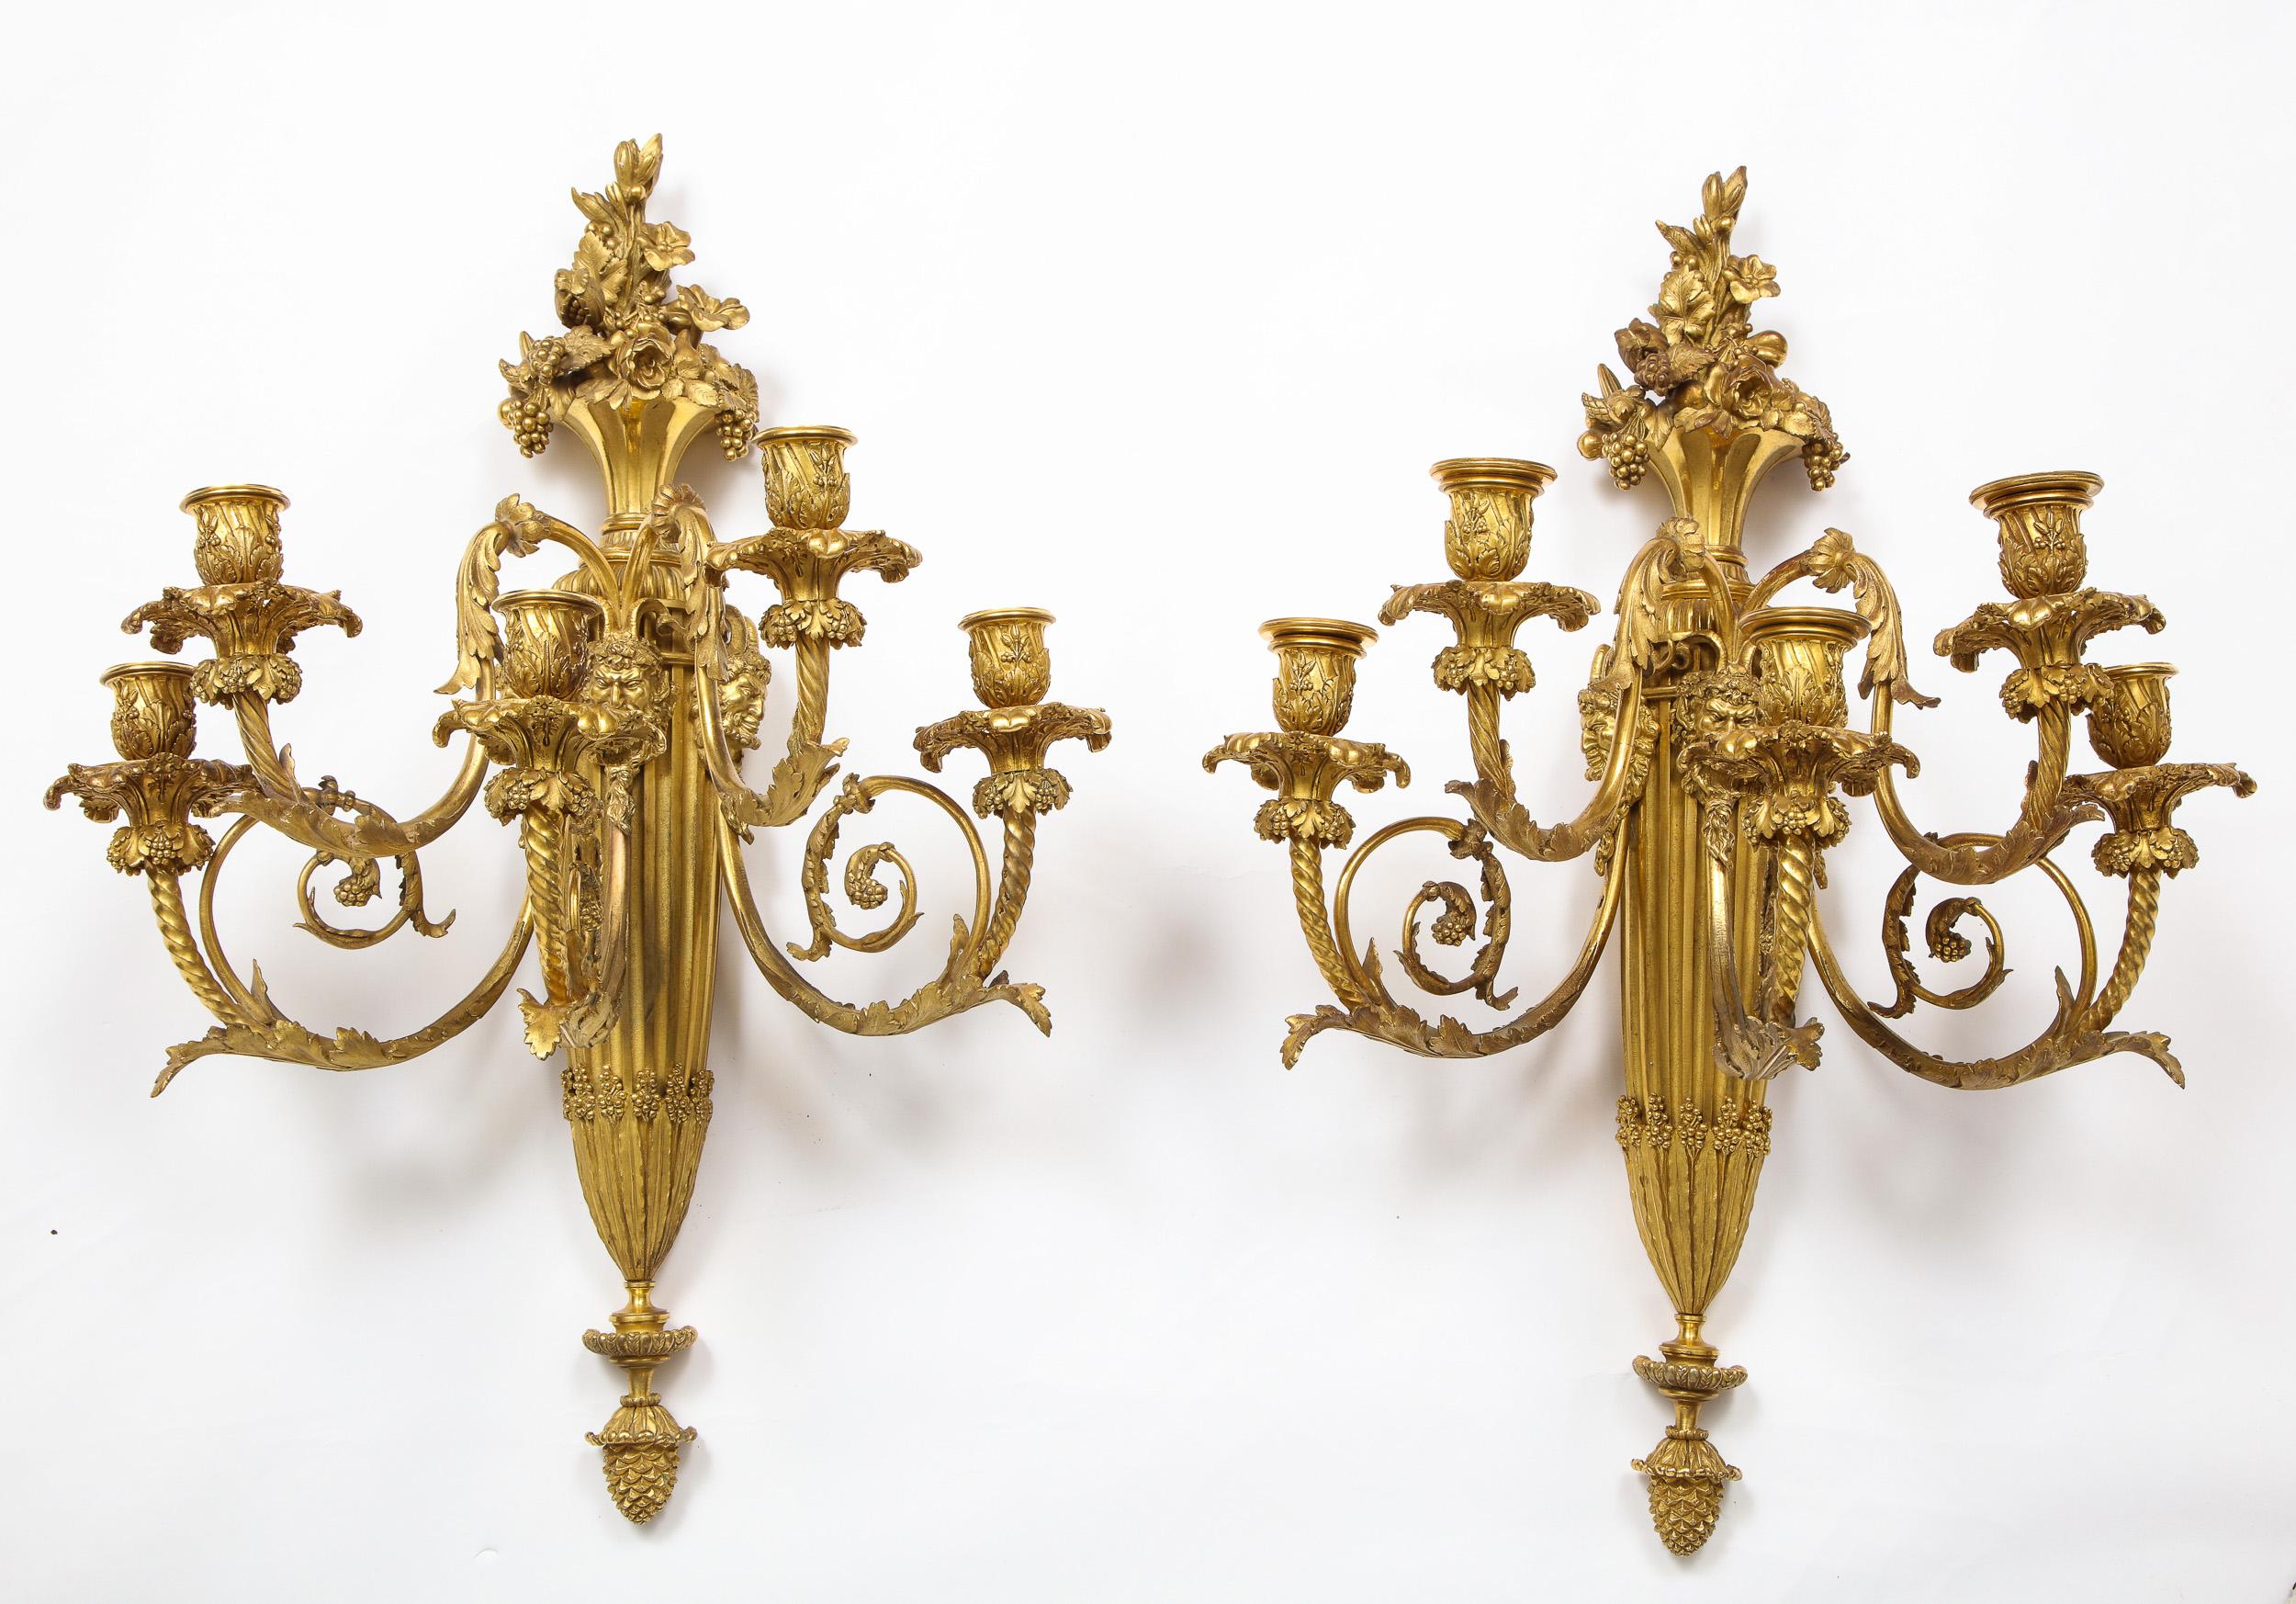 A very fine pair of Louis XVI style French ormolu bronze five-light wall appliques, sconces, Paris, circa 1870.

Attributed to Henry Dasson, after the model by Thomire.

Very high quality pair of wall-lights. Lots of detailing to every piece of